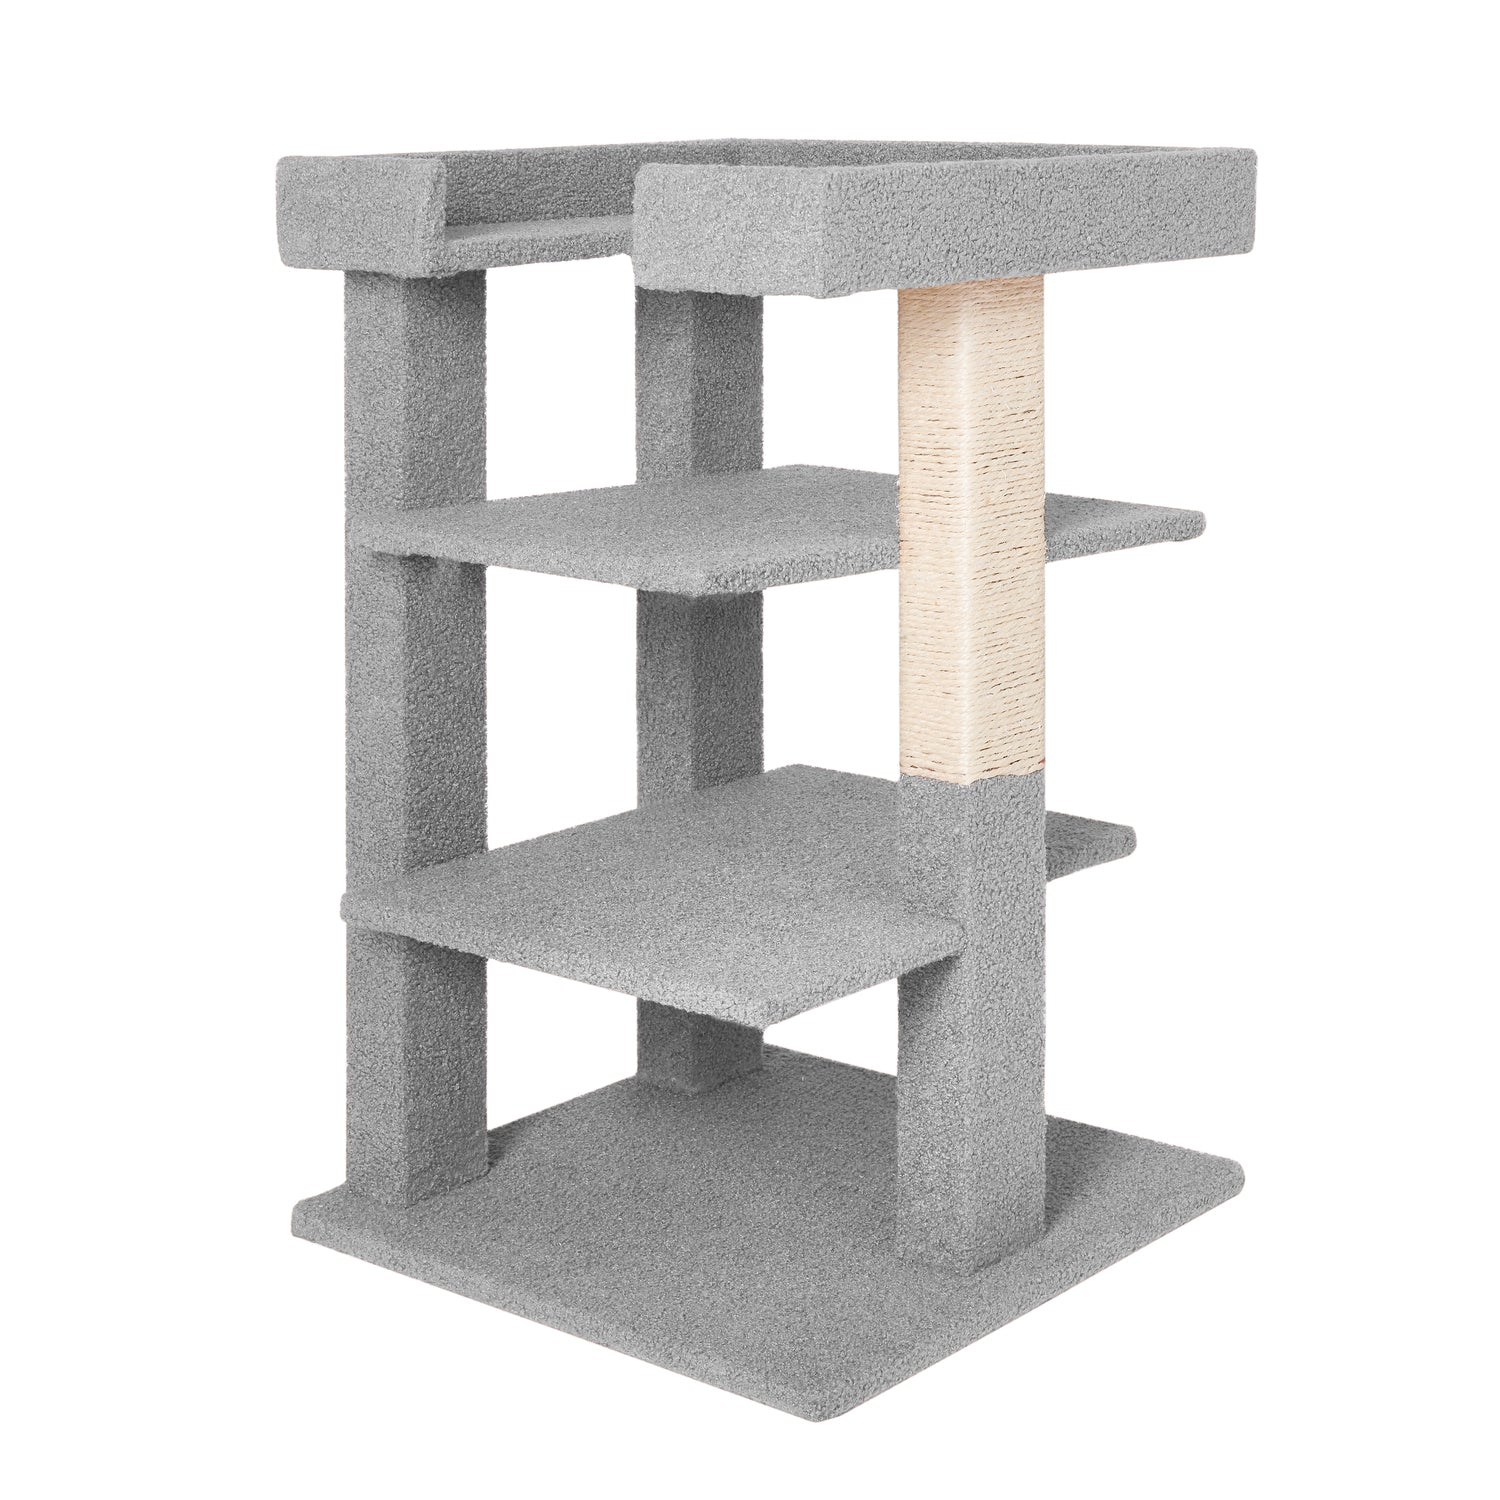 Naomi Home Multi-Level Cat Scratch Tower Wooden Furniture, Cat Home for Large, Small, Little Cats-Color: Beige Animals & Pet Supplies > Pet Supplies > Cat Supplies > Cat Furniture Naomi Home   